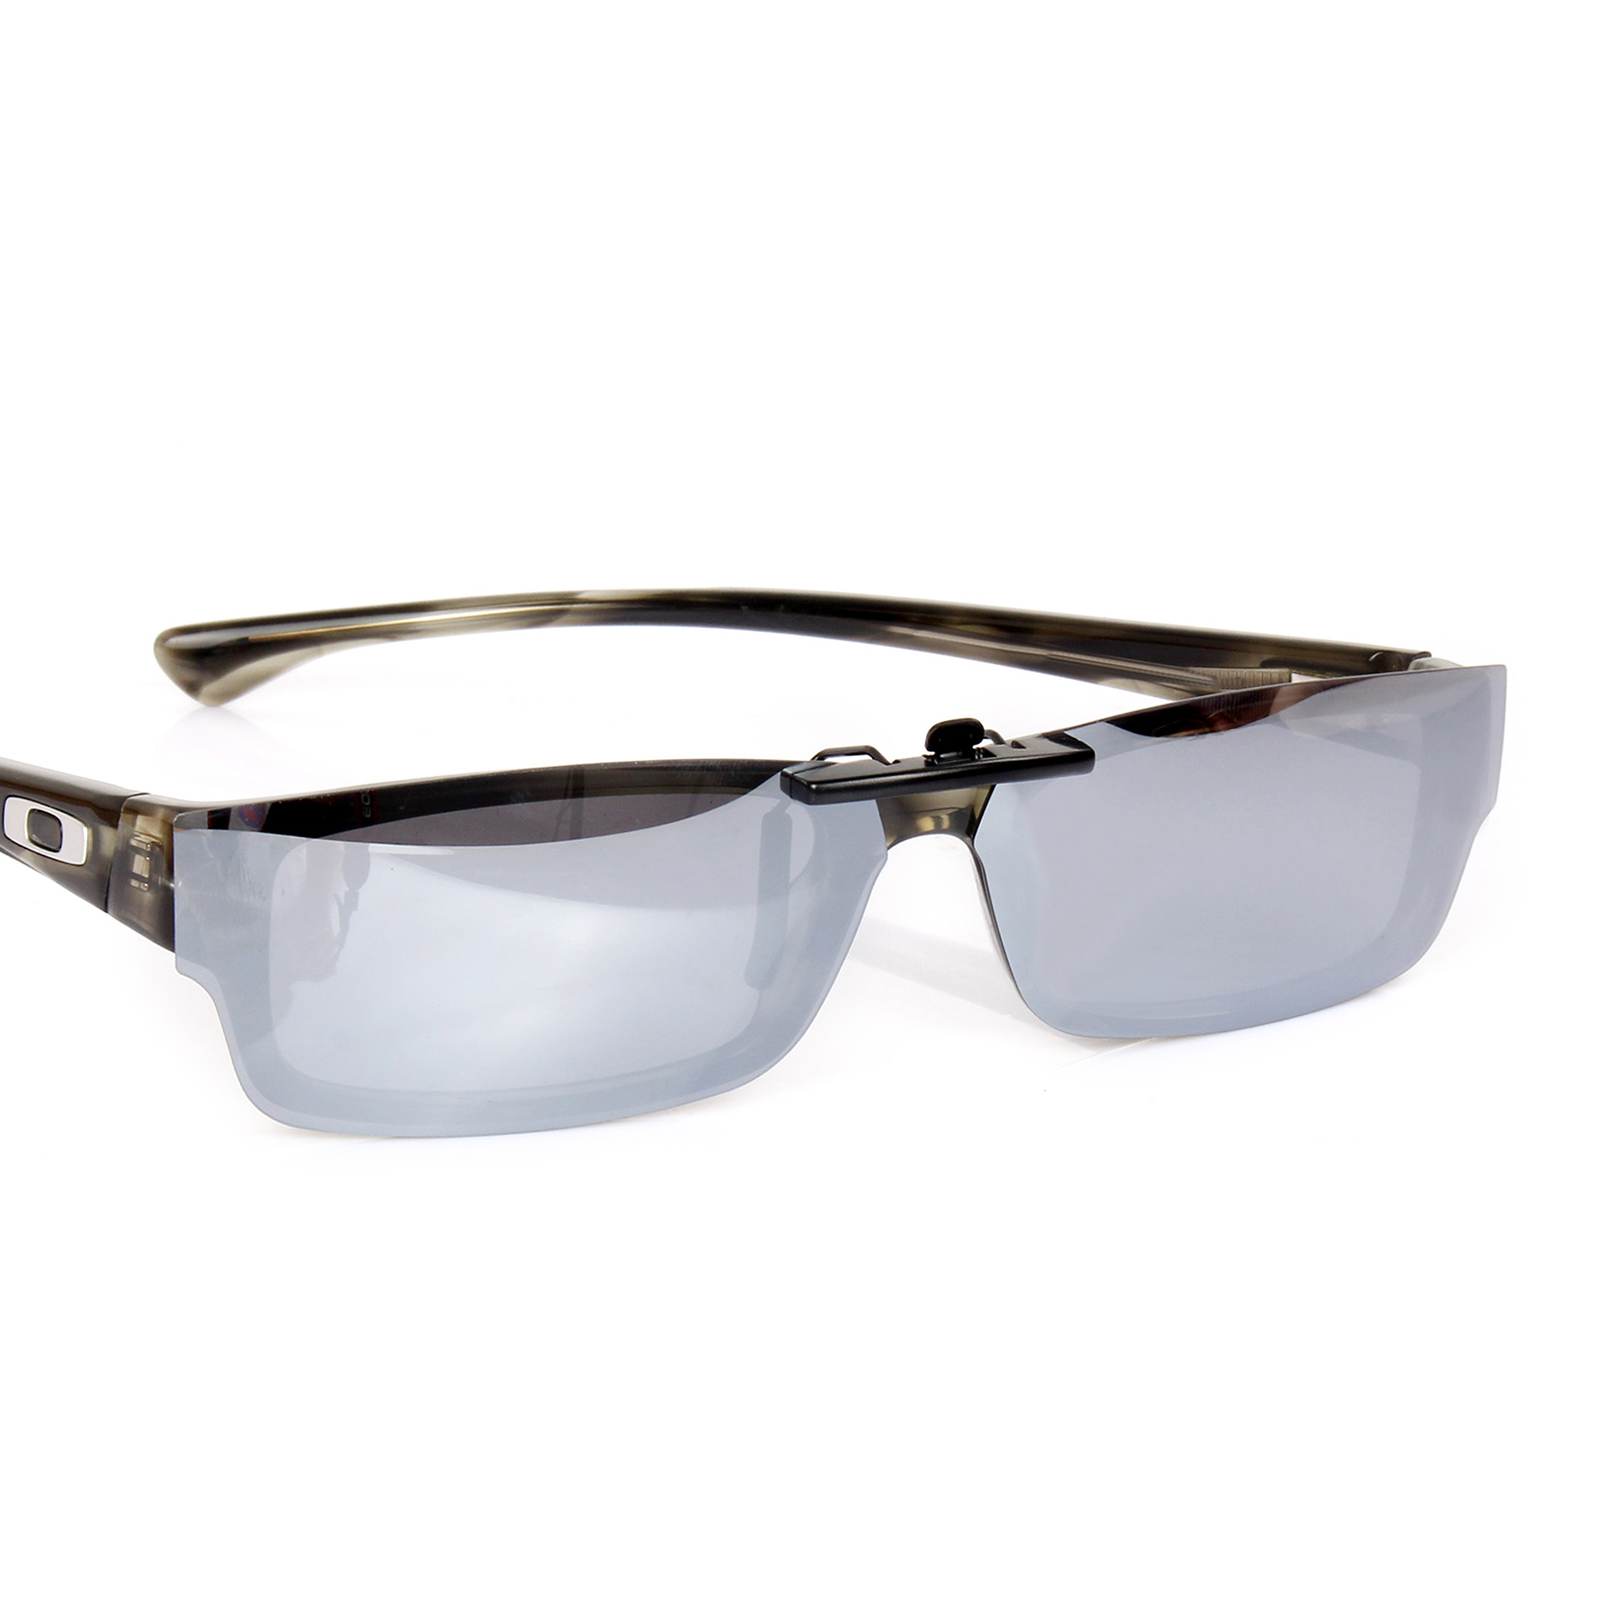 Enrichment Canteen Scaring Oakley SERVO OX1066 Silver Polarized Replacement Sunglasses